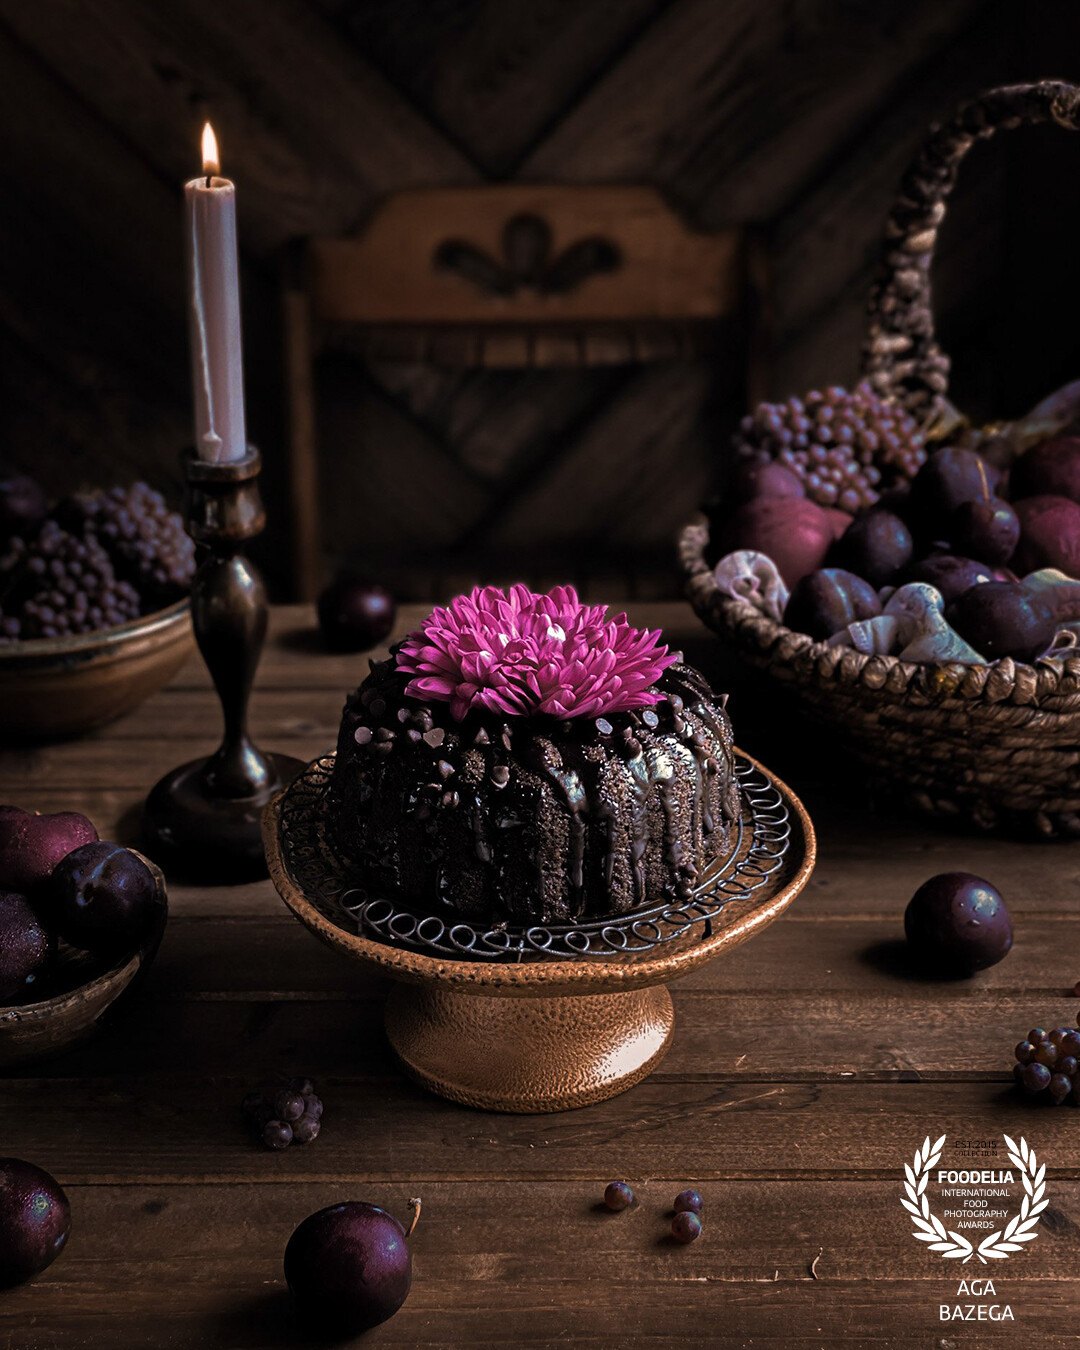 Chocolate cake, captured with natural light.